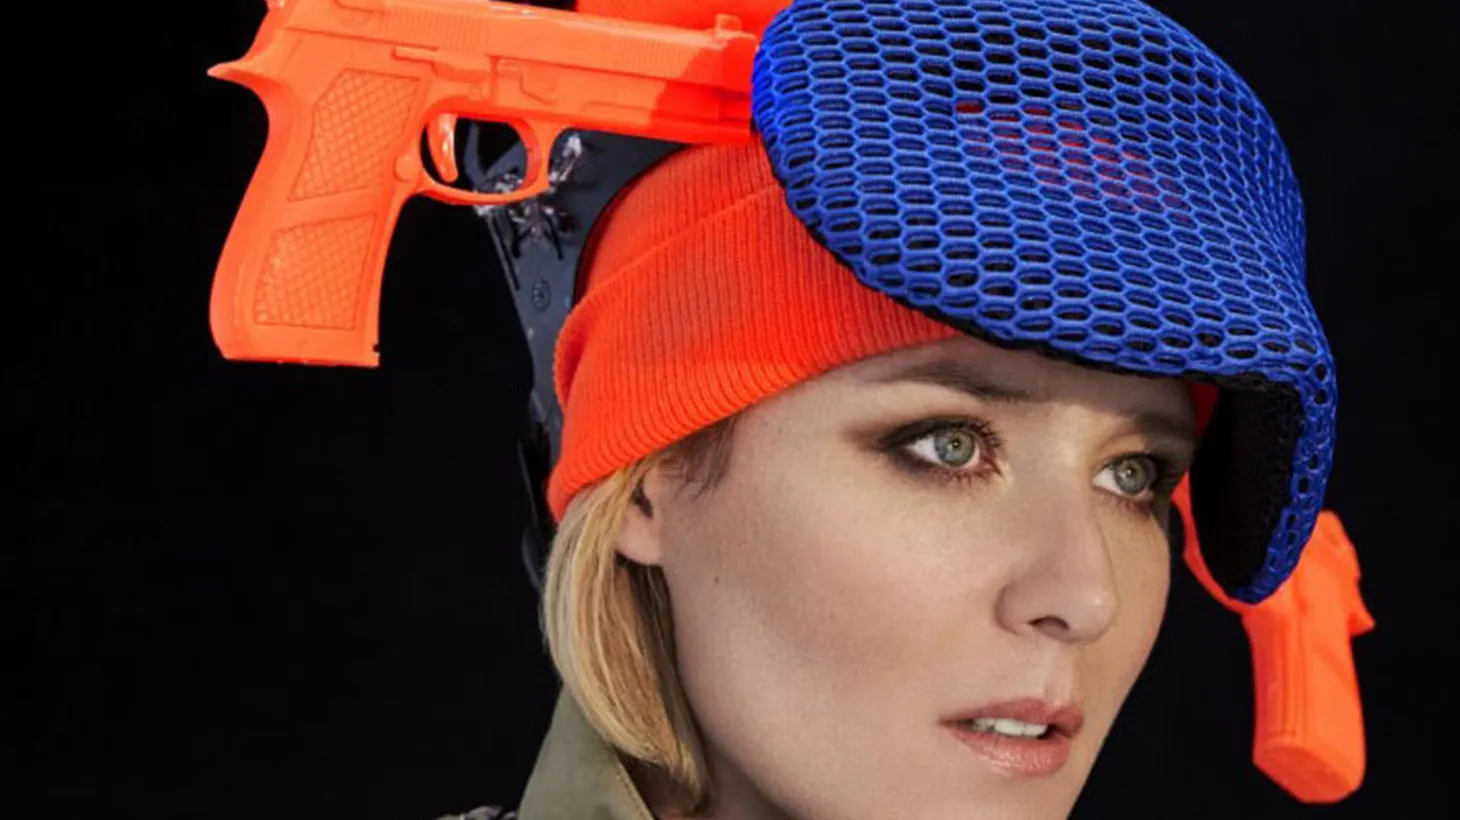 Art pop star Róisín Murphy, formerly of trip hop duo Moloko, will be touring the US solo for the first time this year.